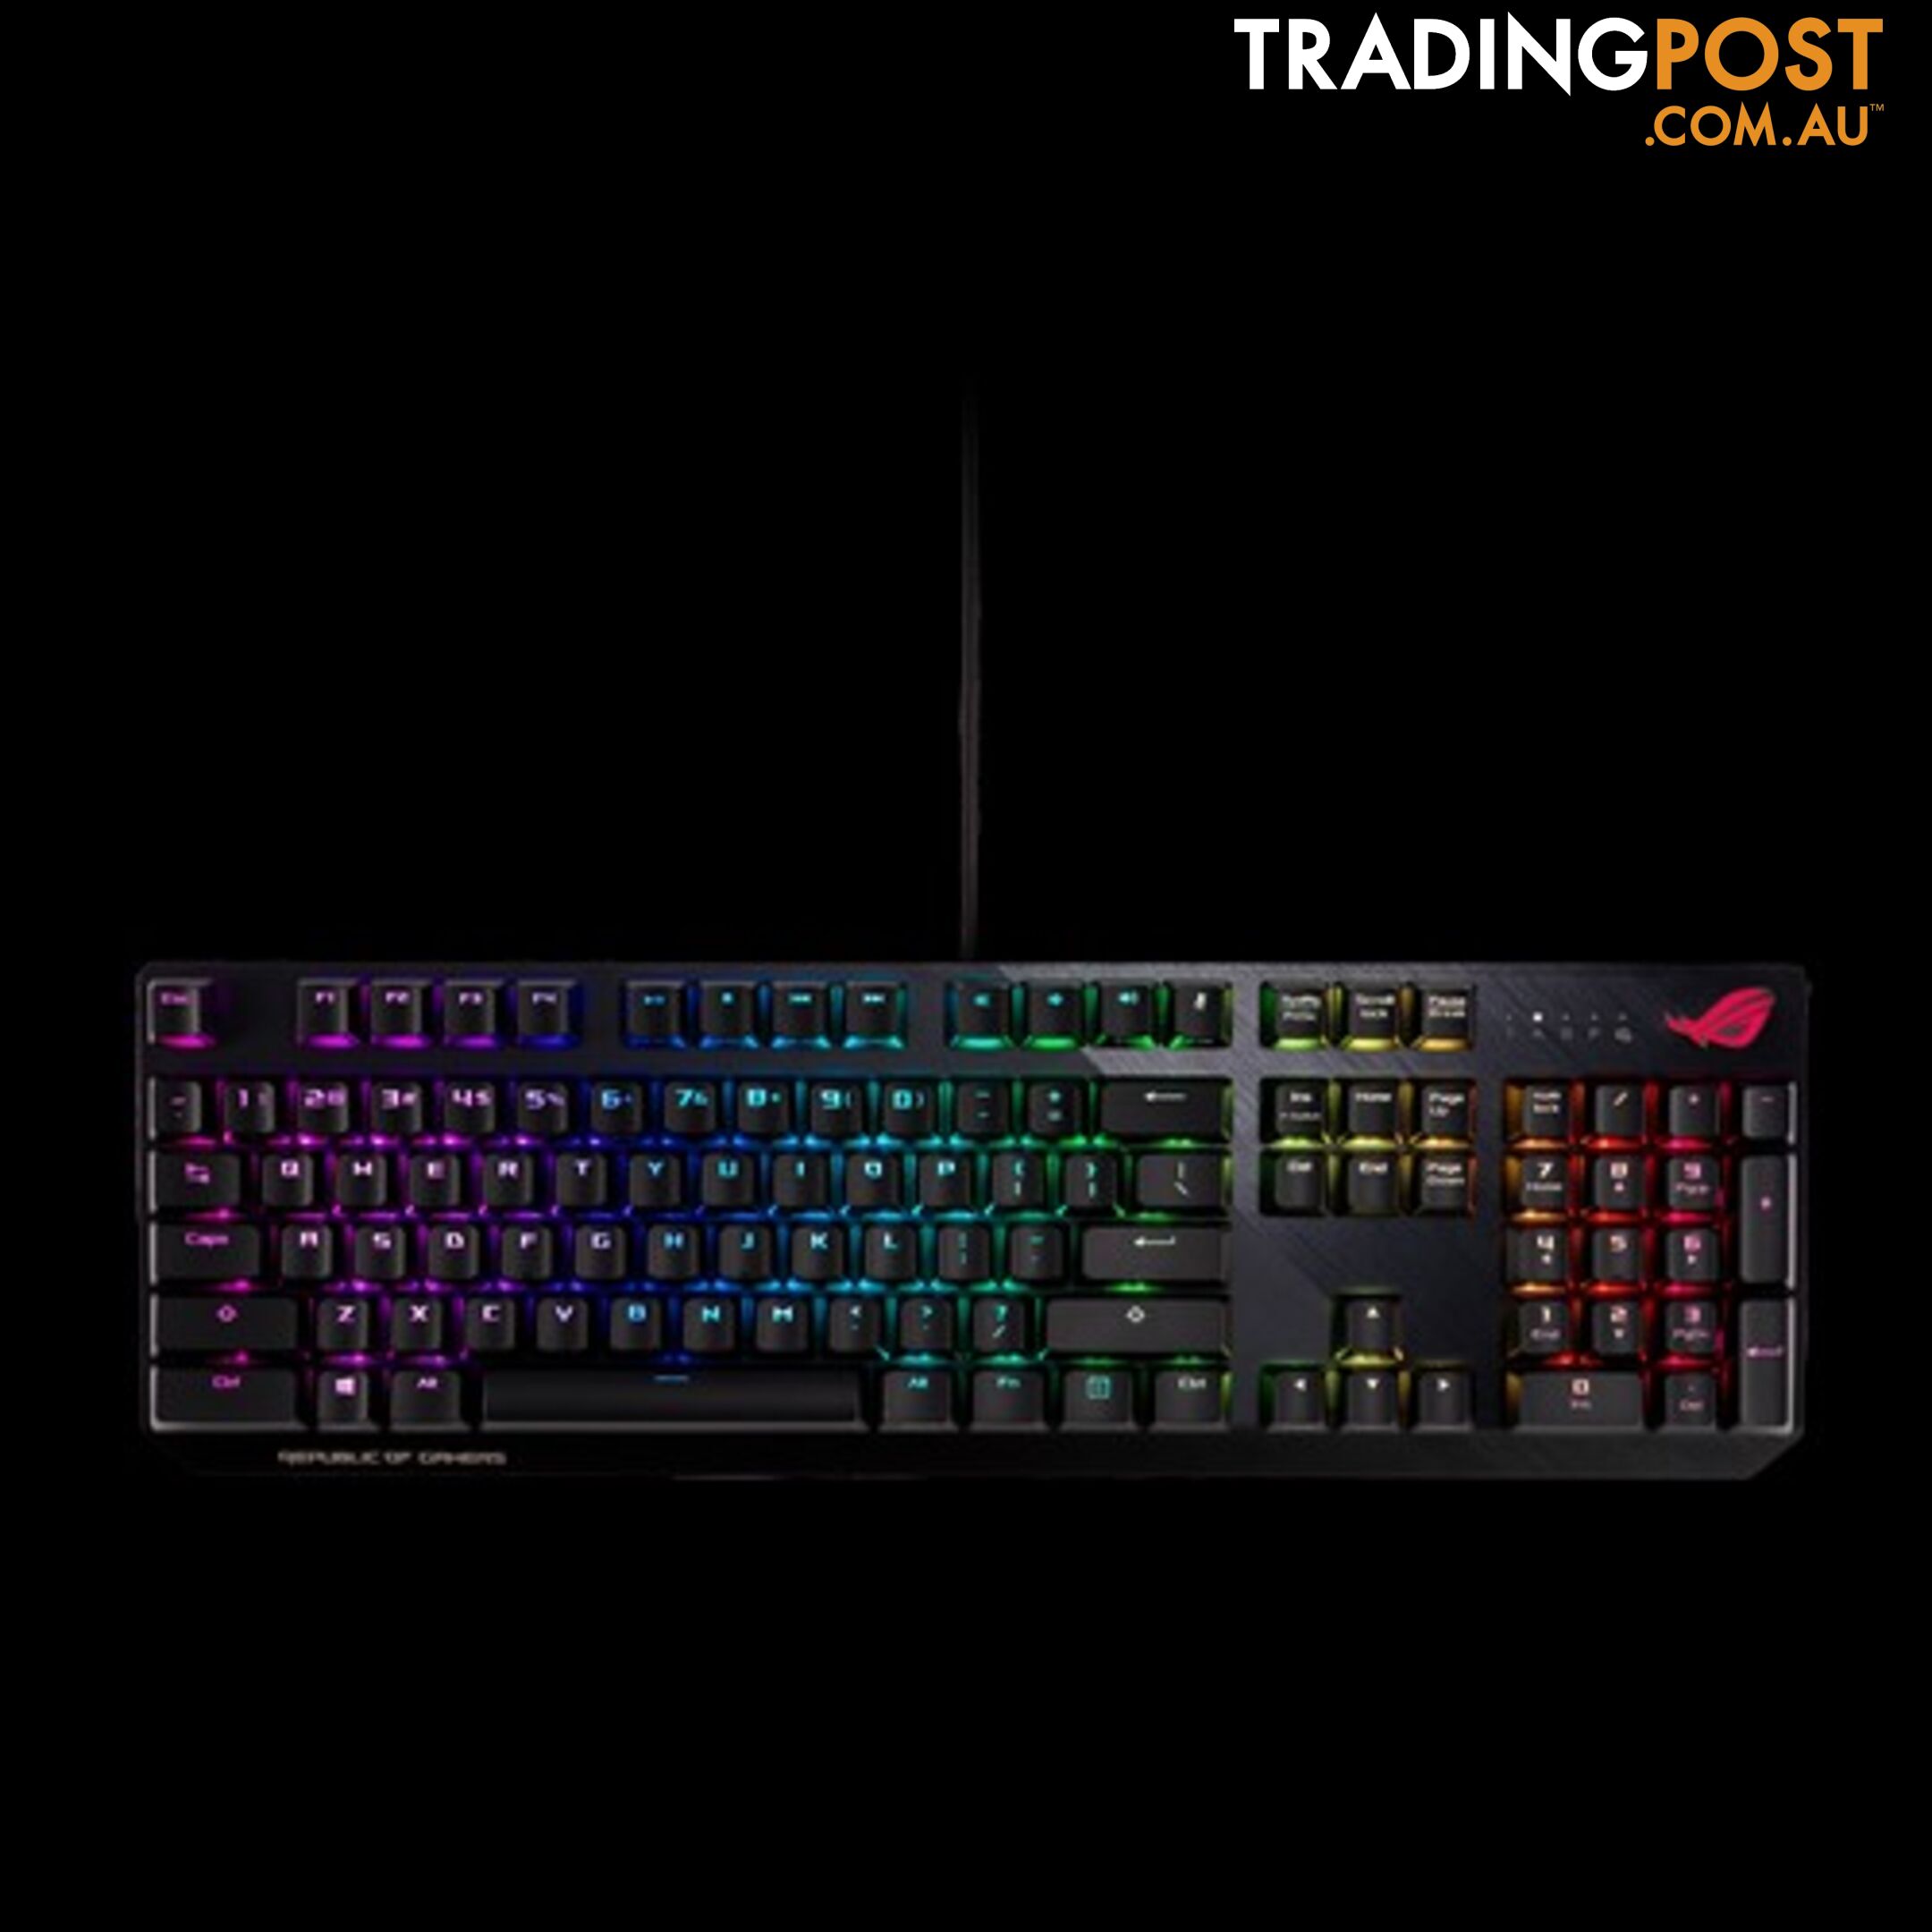 ASUS XA02 STRIX SCOPE RD RGB Wired Mechanical Gaming Keyboard, Cherry MX switches, Aluminum Frame - KBA-STRIX-SCOPE-RD